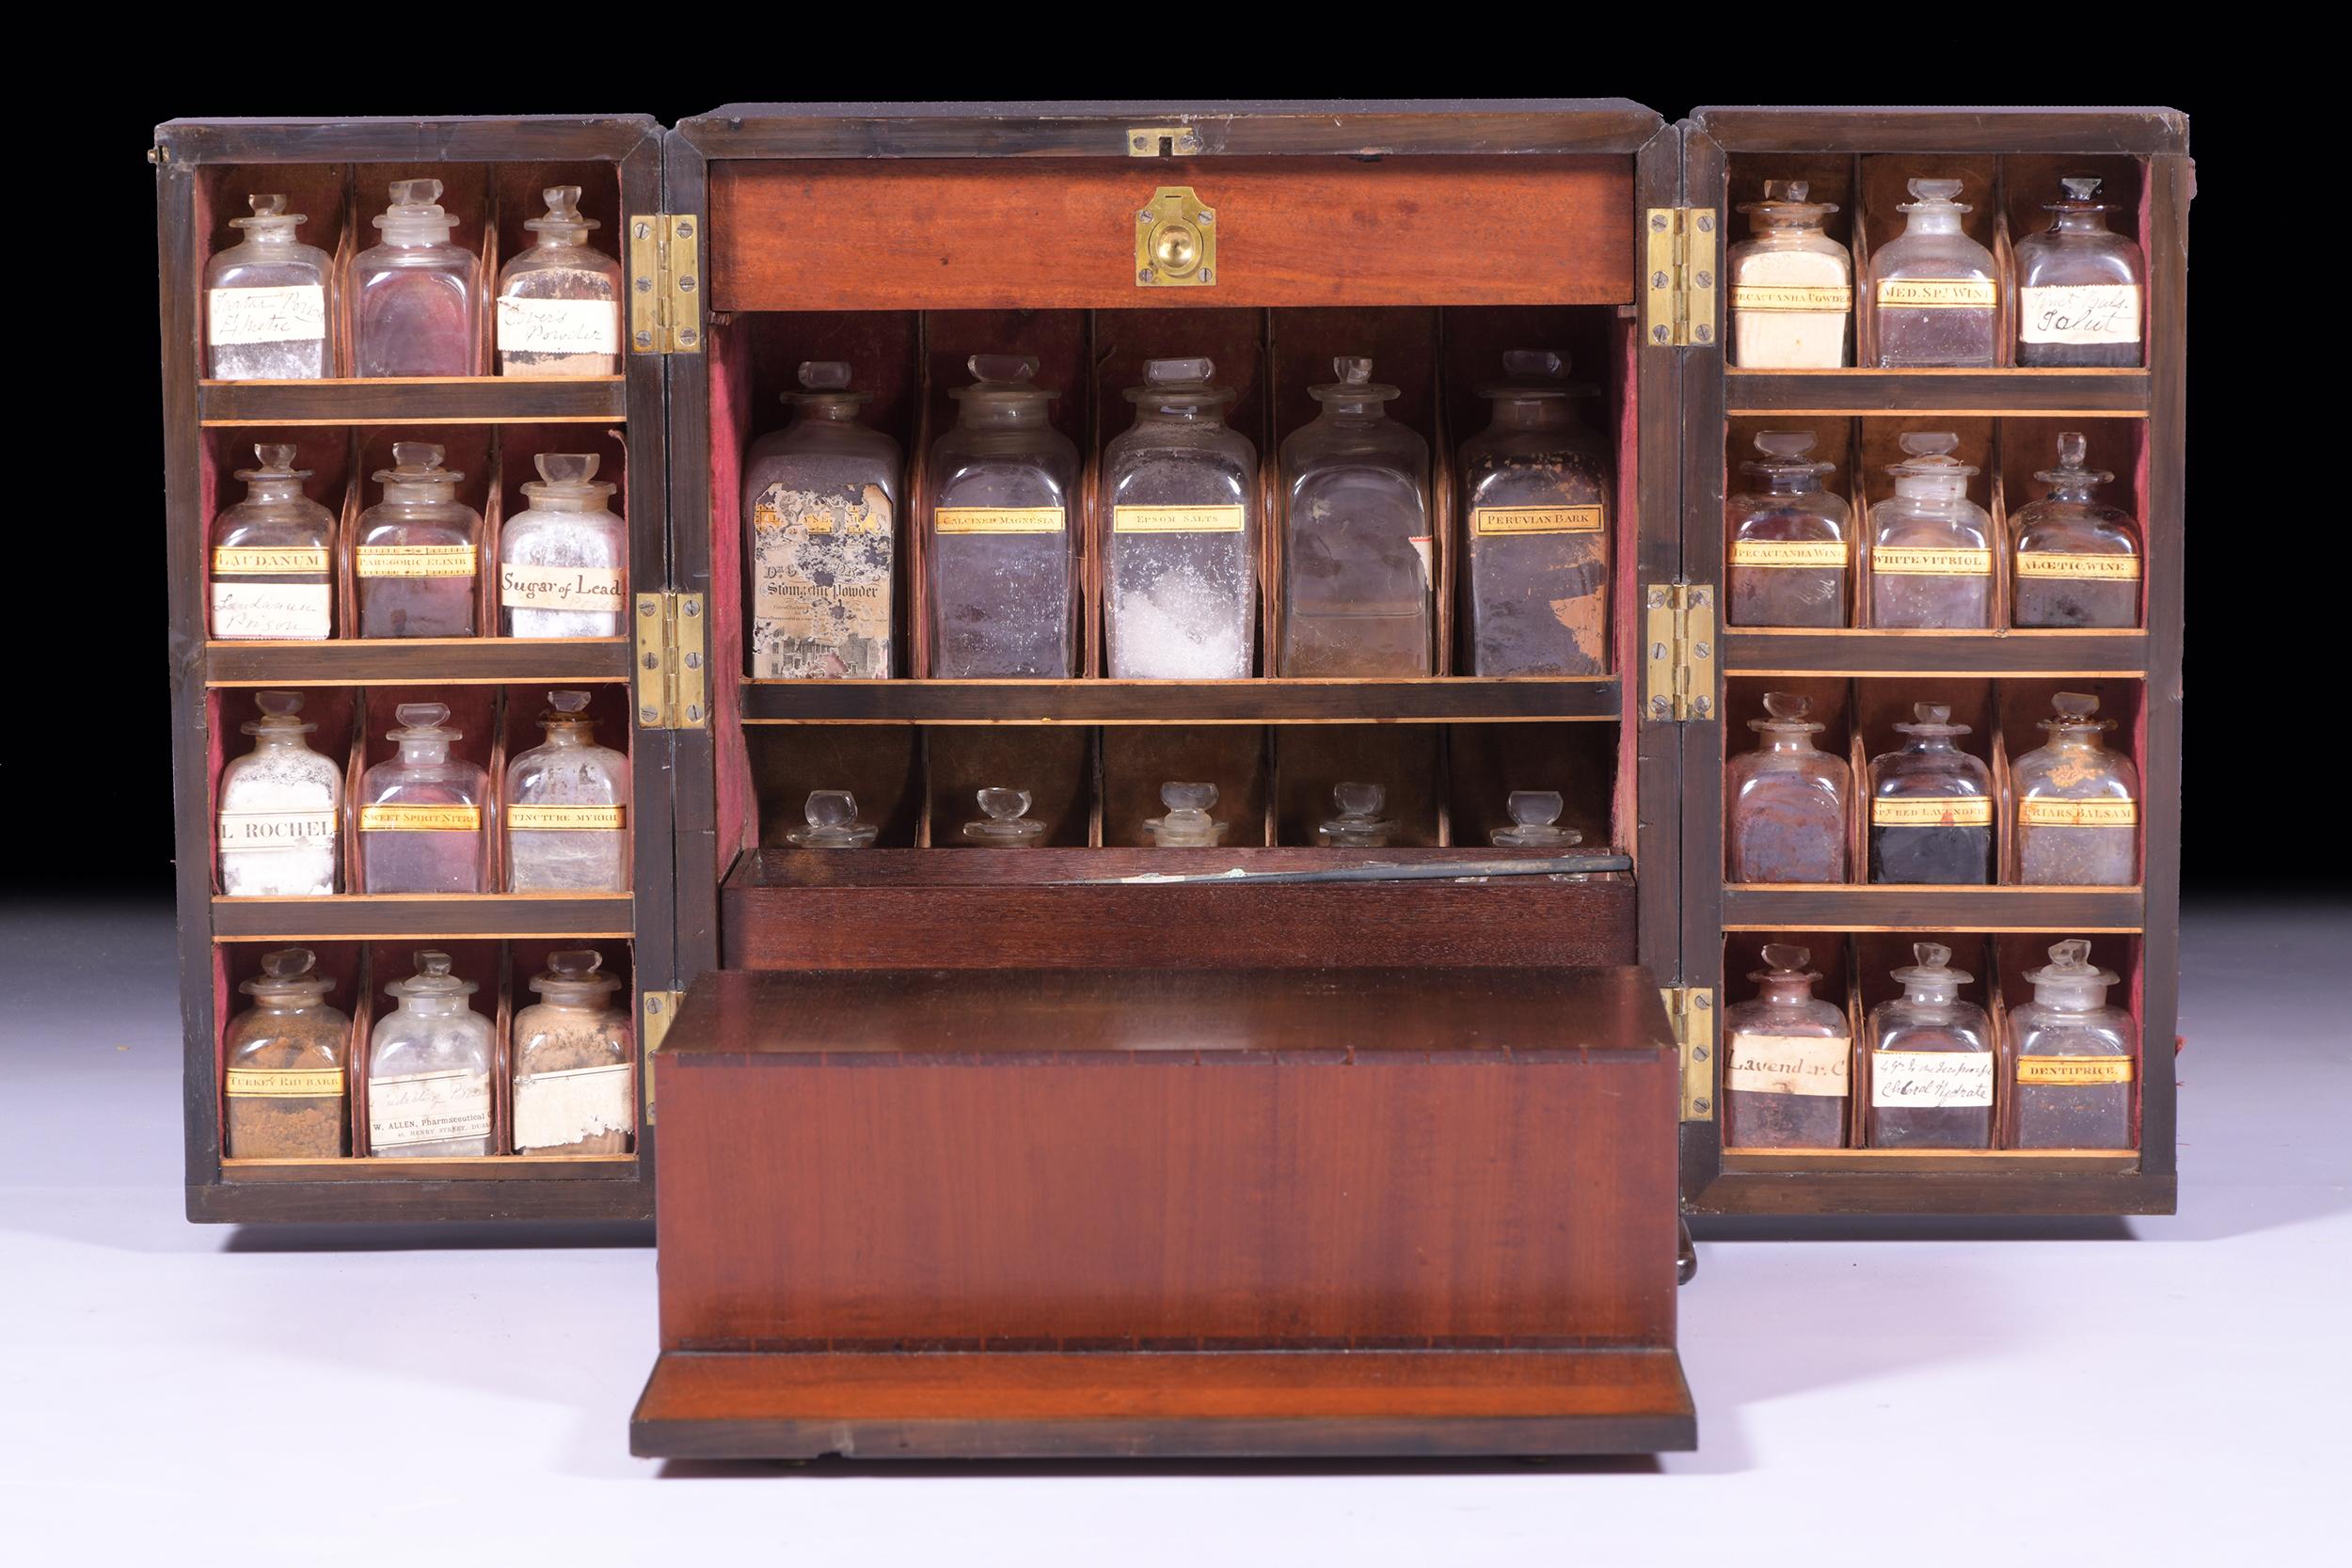 An exceptional early 19th century mahogany apothecary cabinet medicine chest with brass carrier handles to each side which opens through the double doors to reveal an arrangement of bottles, with labels and contents, partially full apothecary